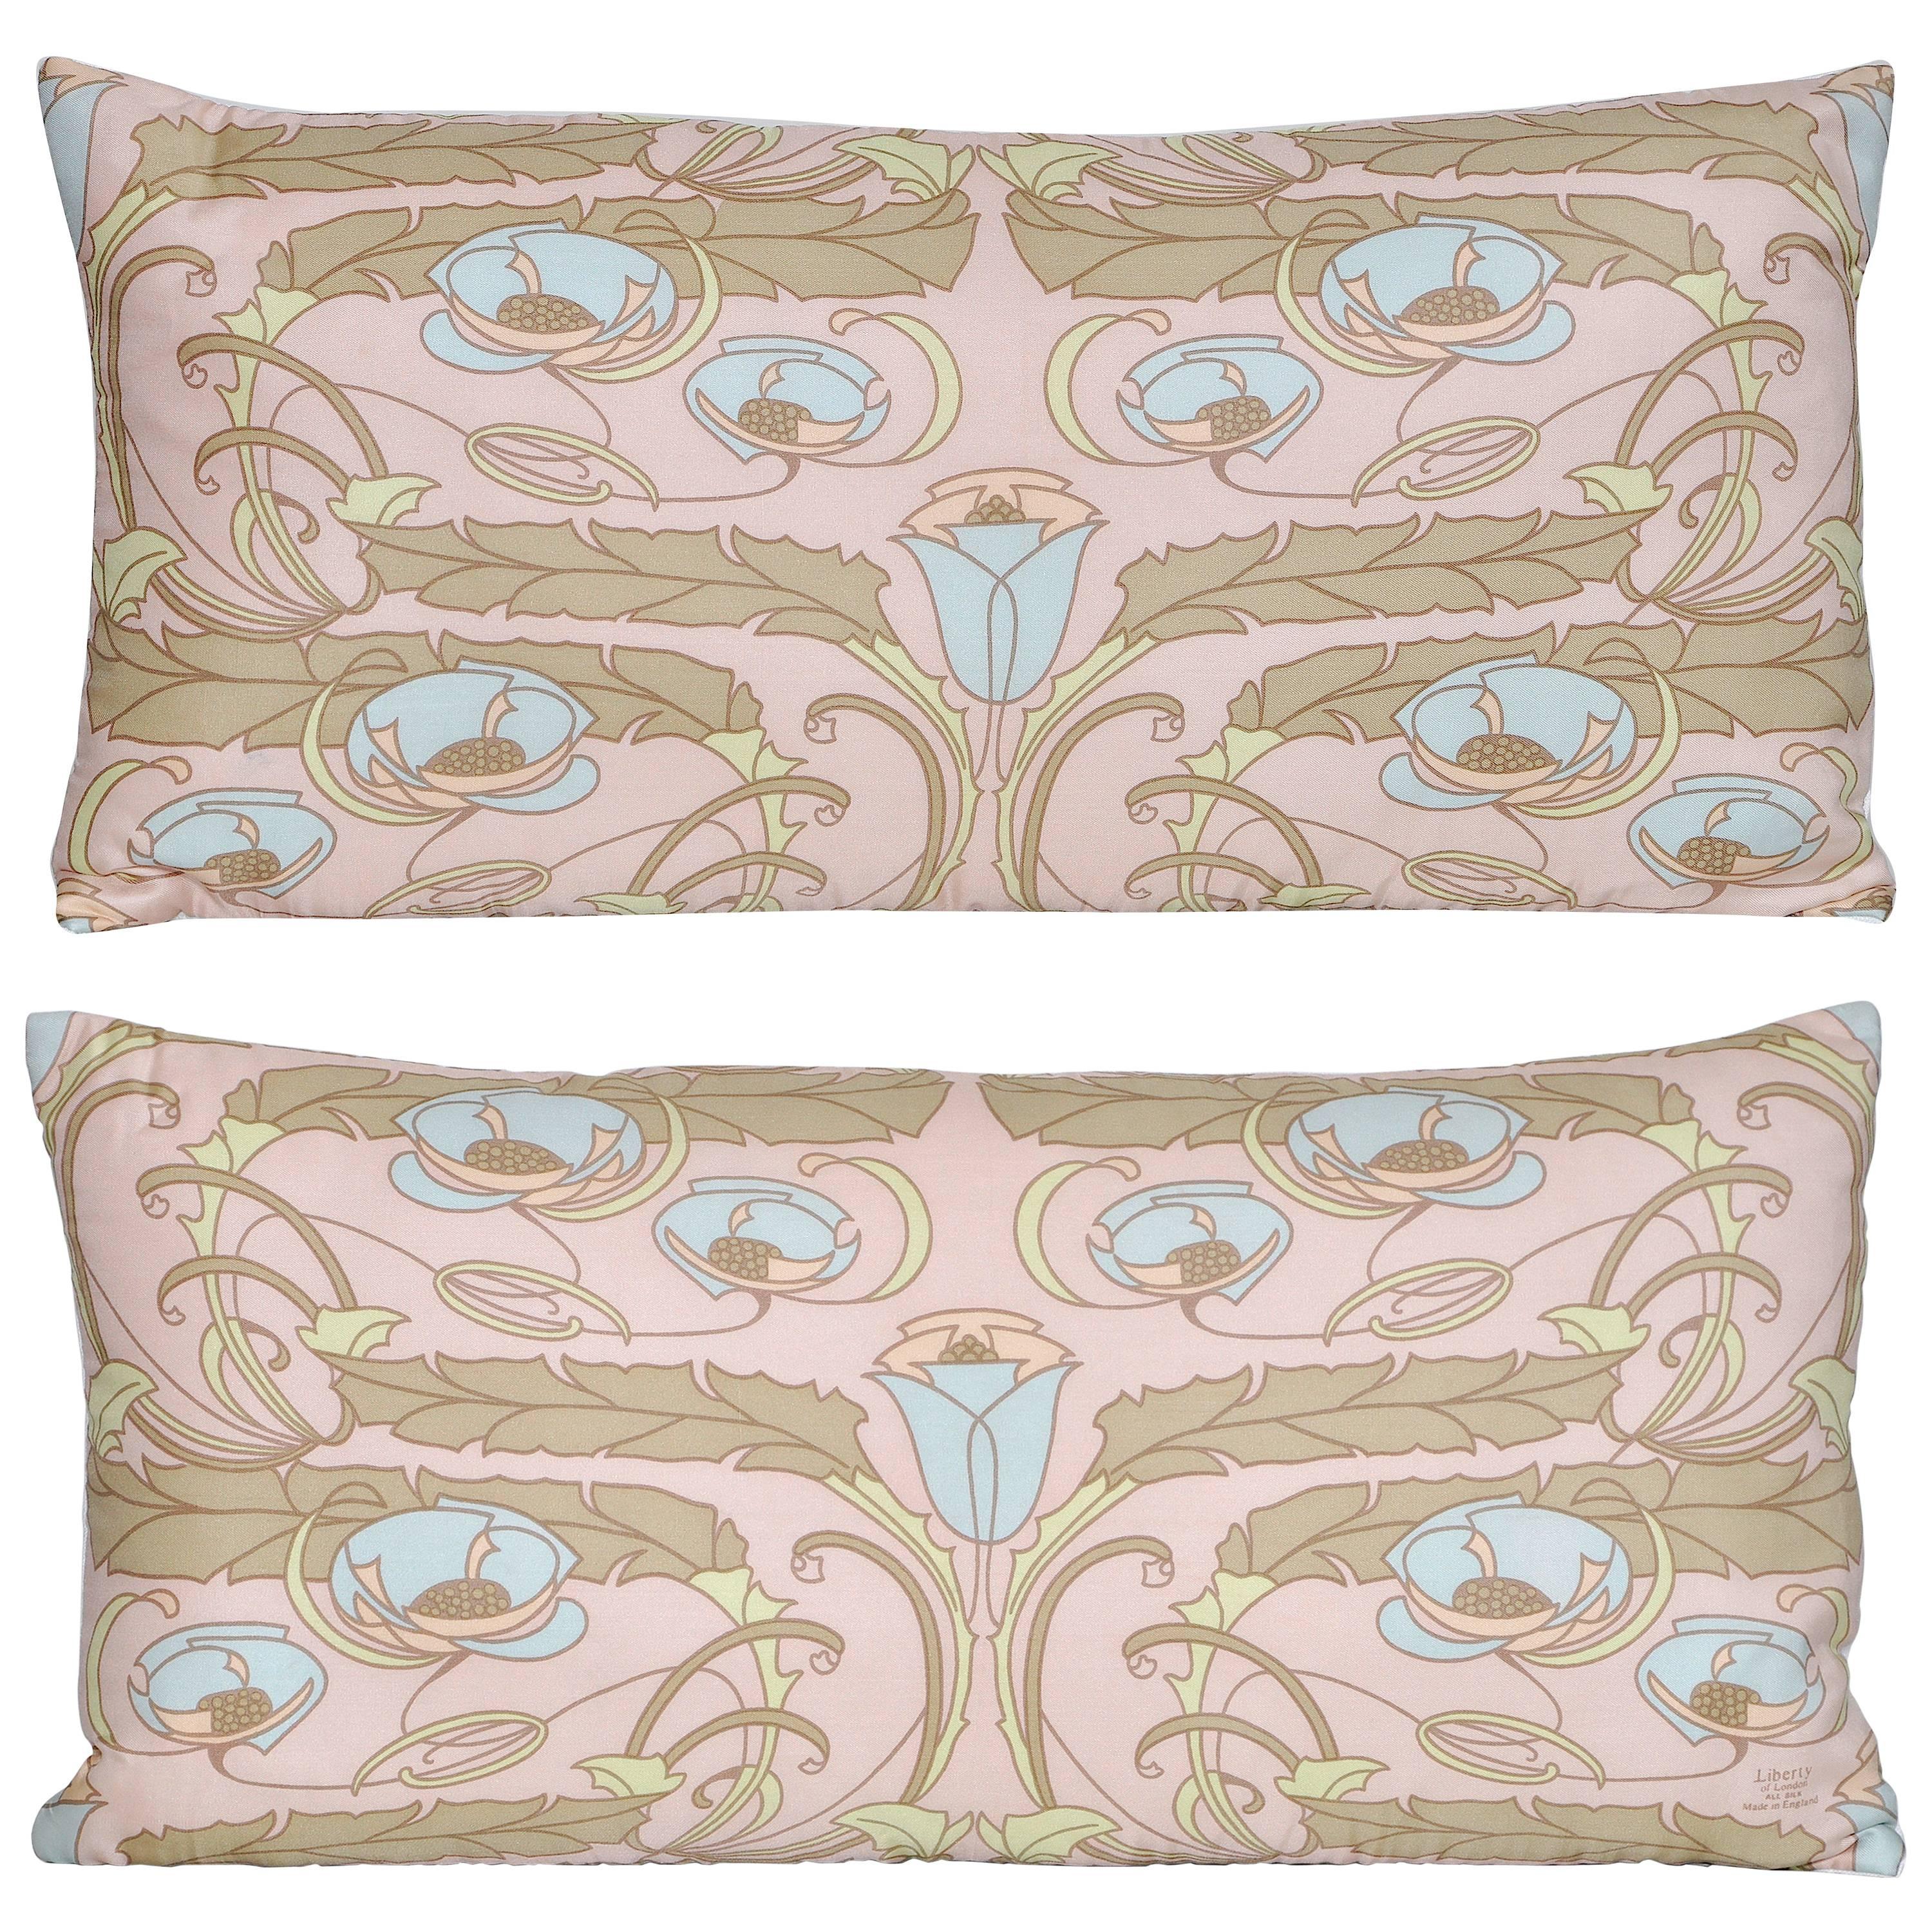 Pair of Vintage Liberty of London Silk Scarf with Irish Linen Cushions Pillows  For Sale